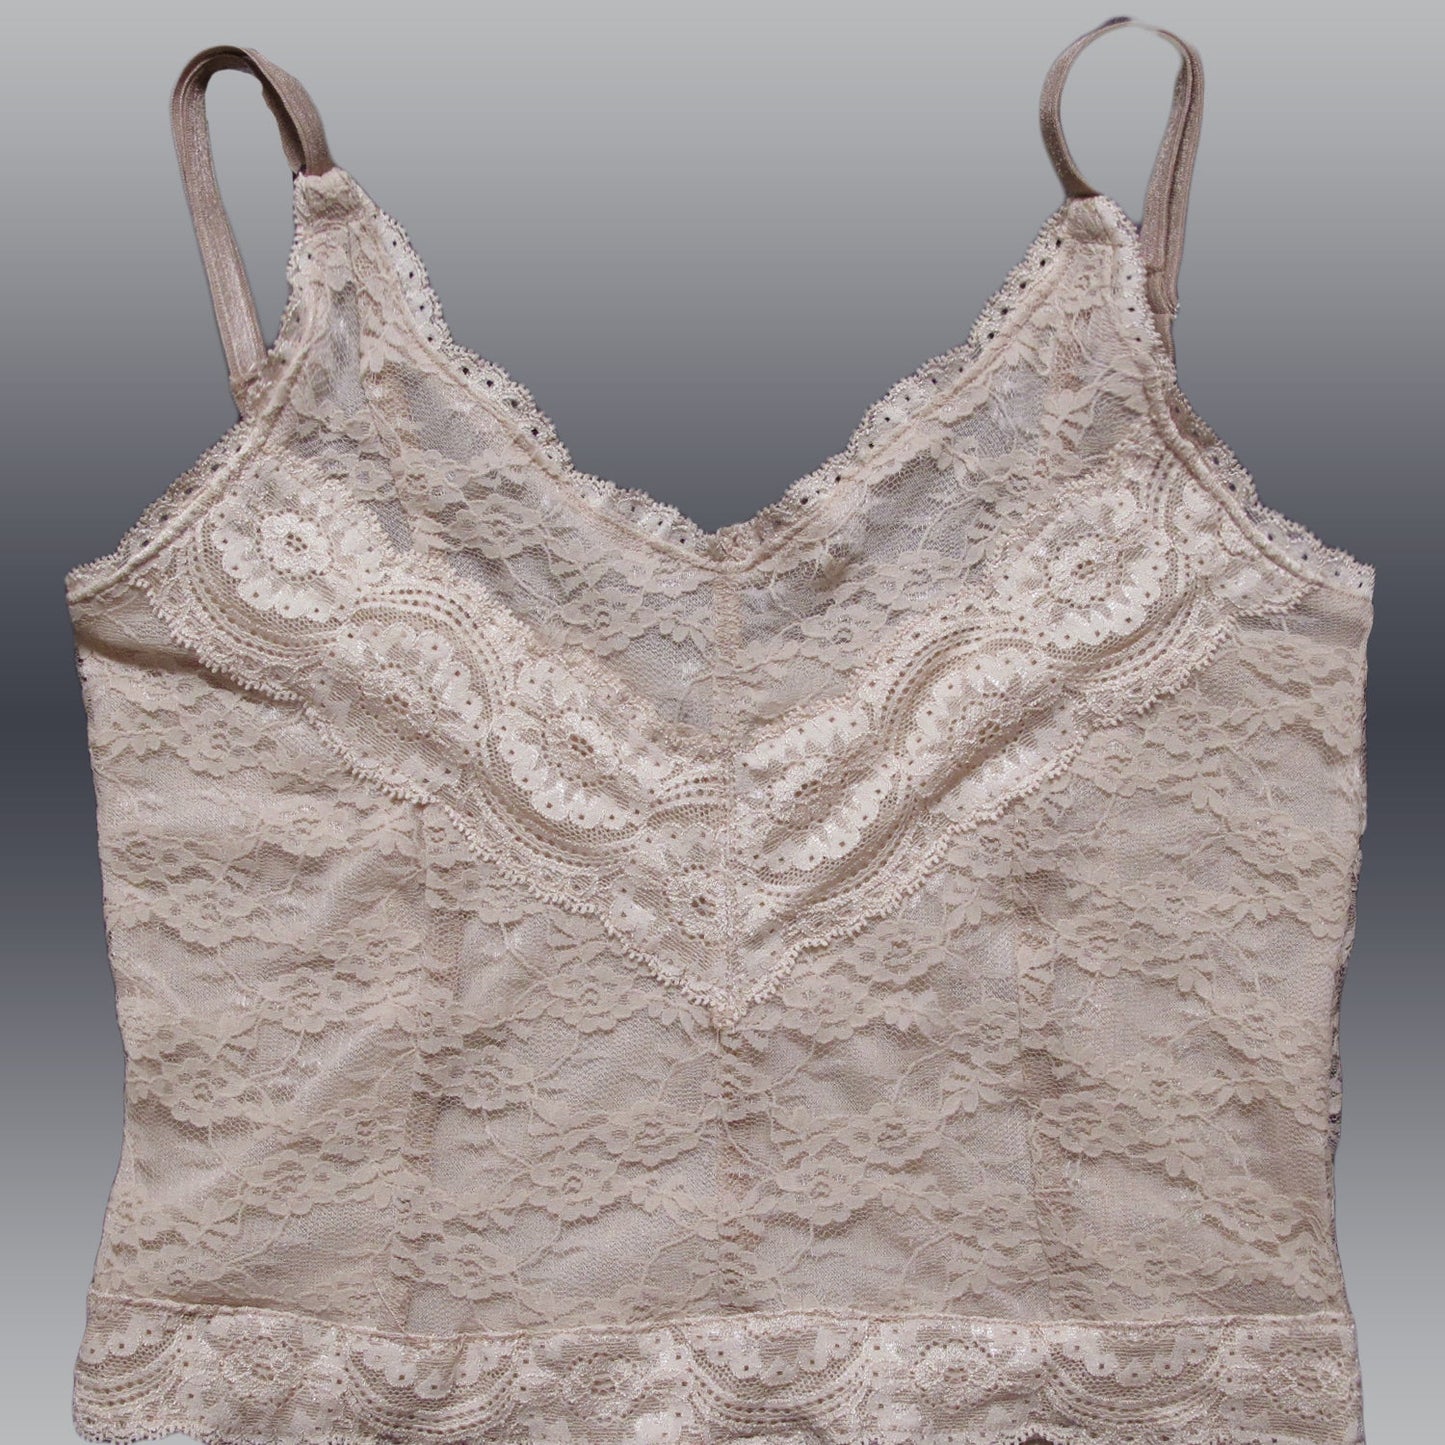 Stretch Lace Camisole with Adjustable Straps